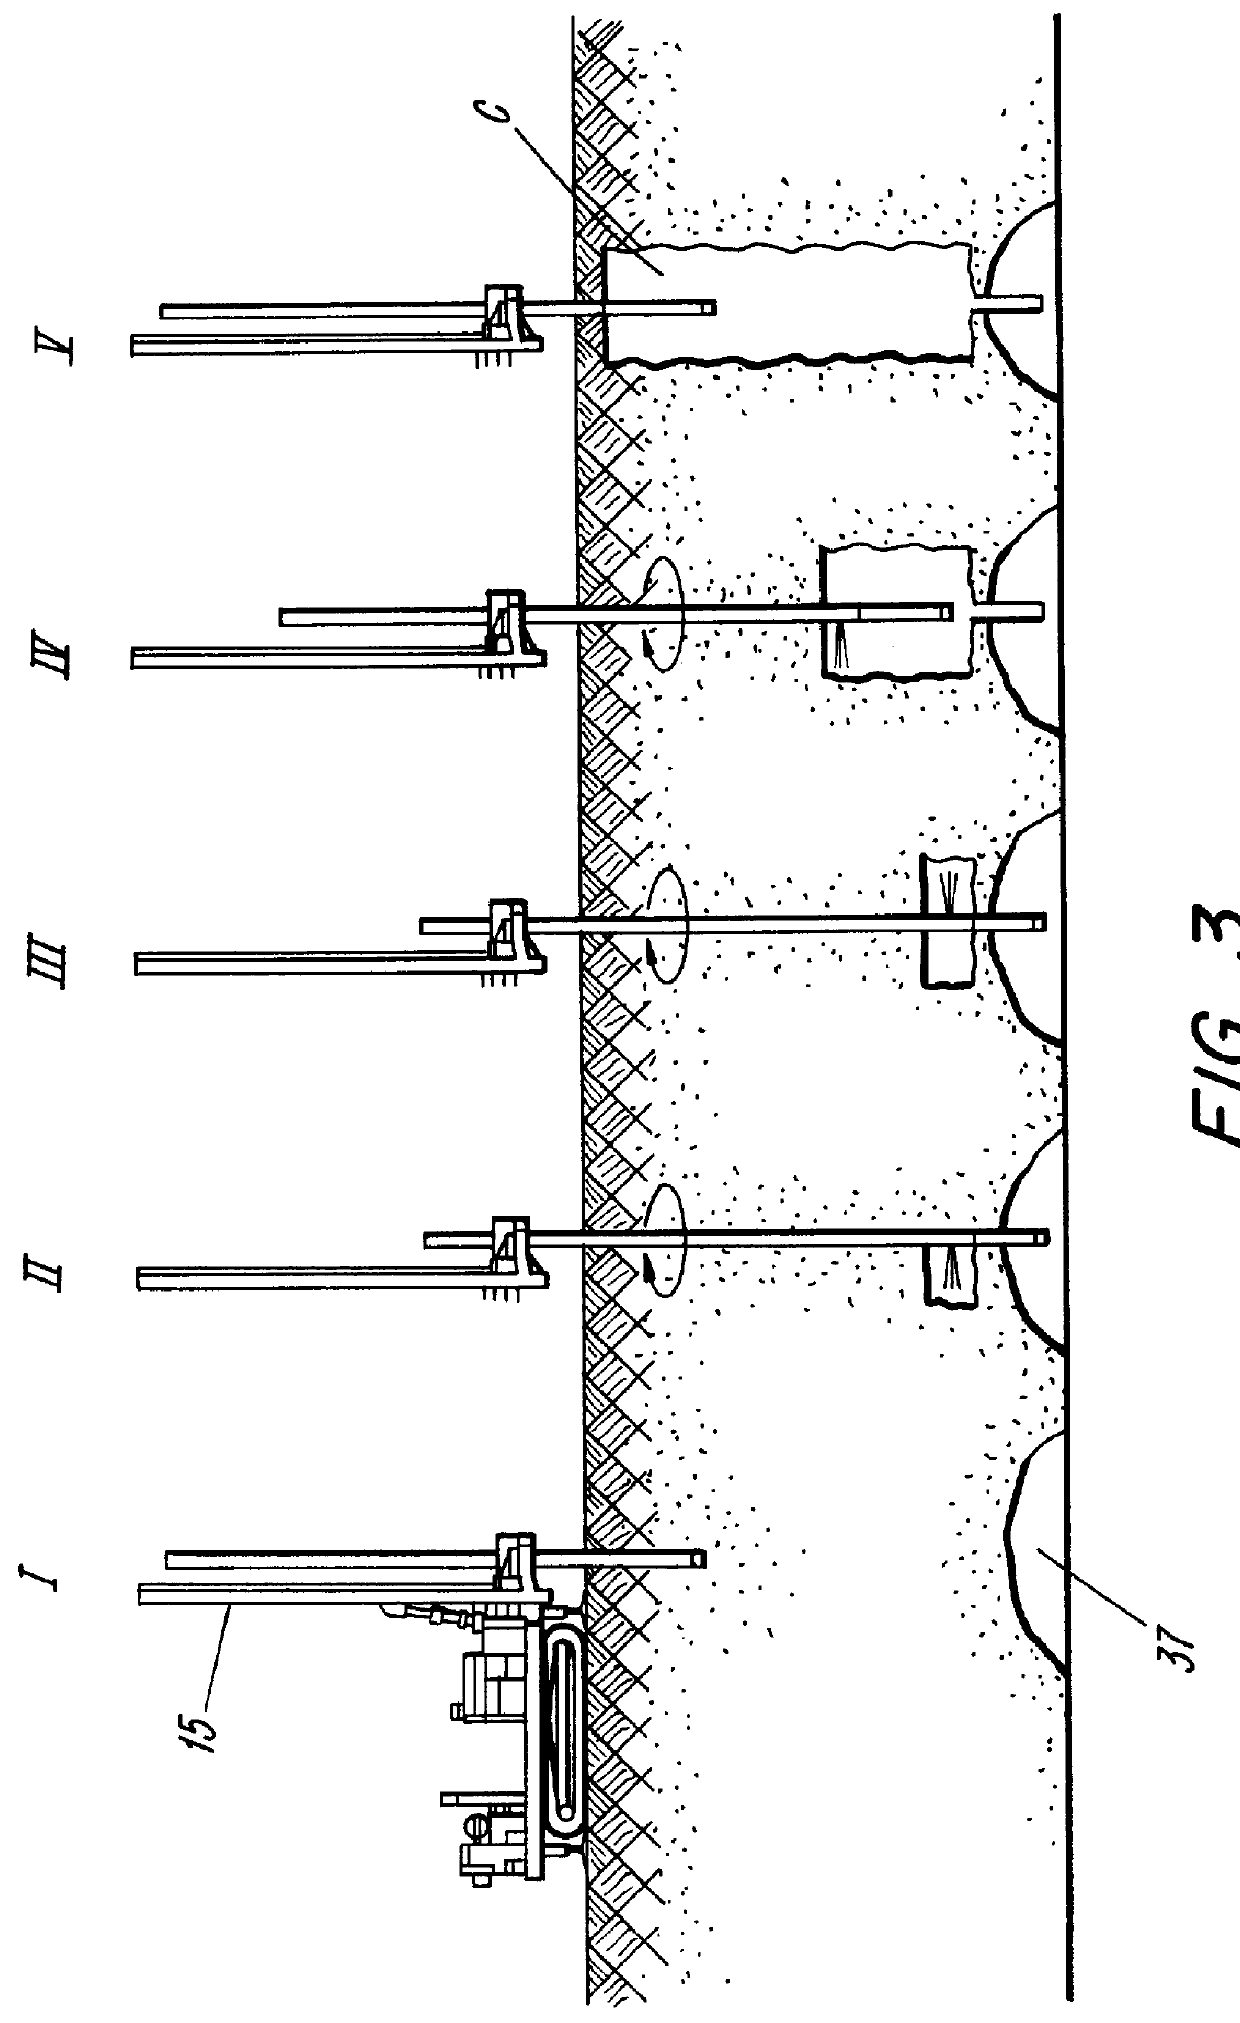 Soil consolidation apparatus, tool and method